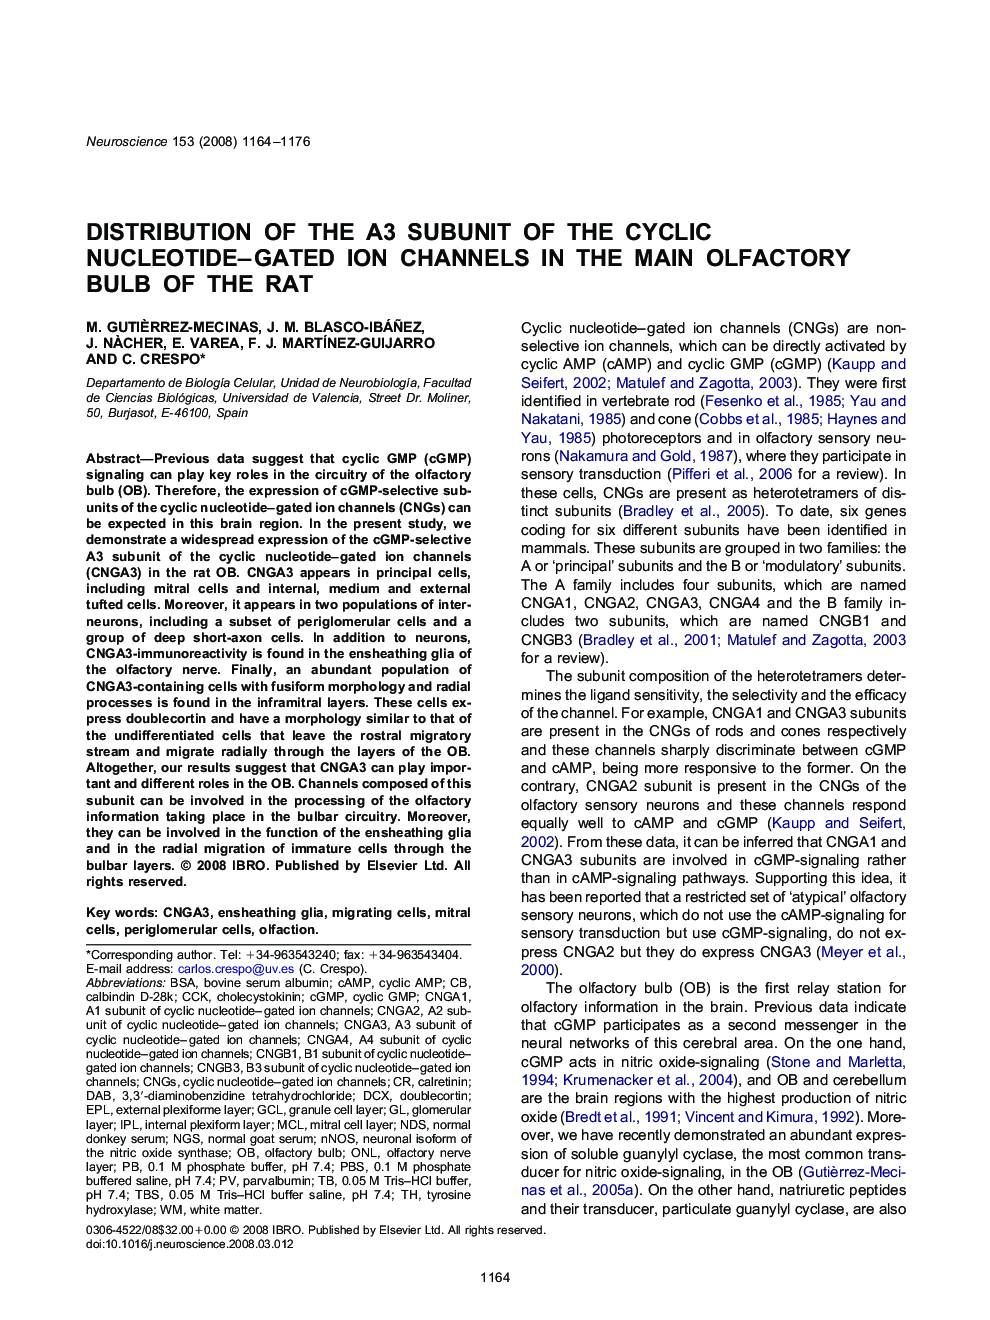 Distribution of the A3 subunit of the cyclic nucleotide–gated ion channels in the main olfactory bulb of the rat